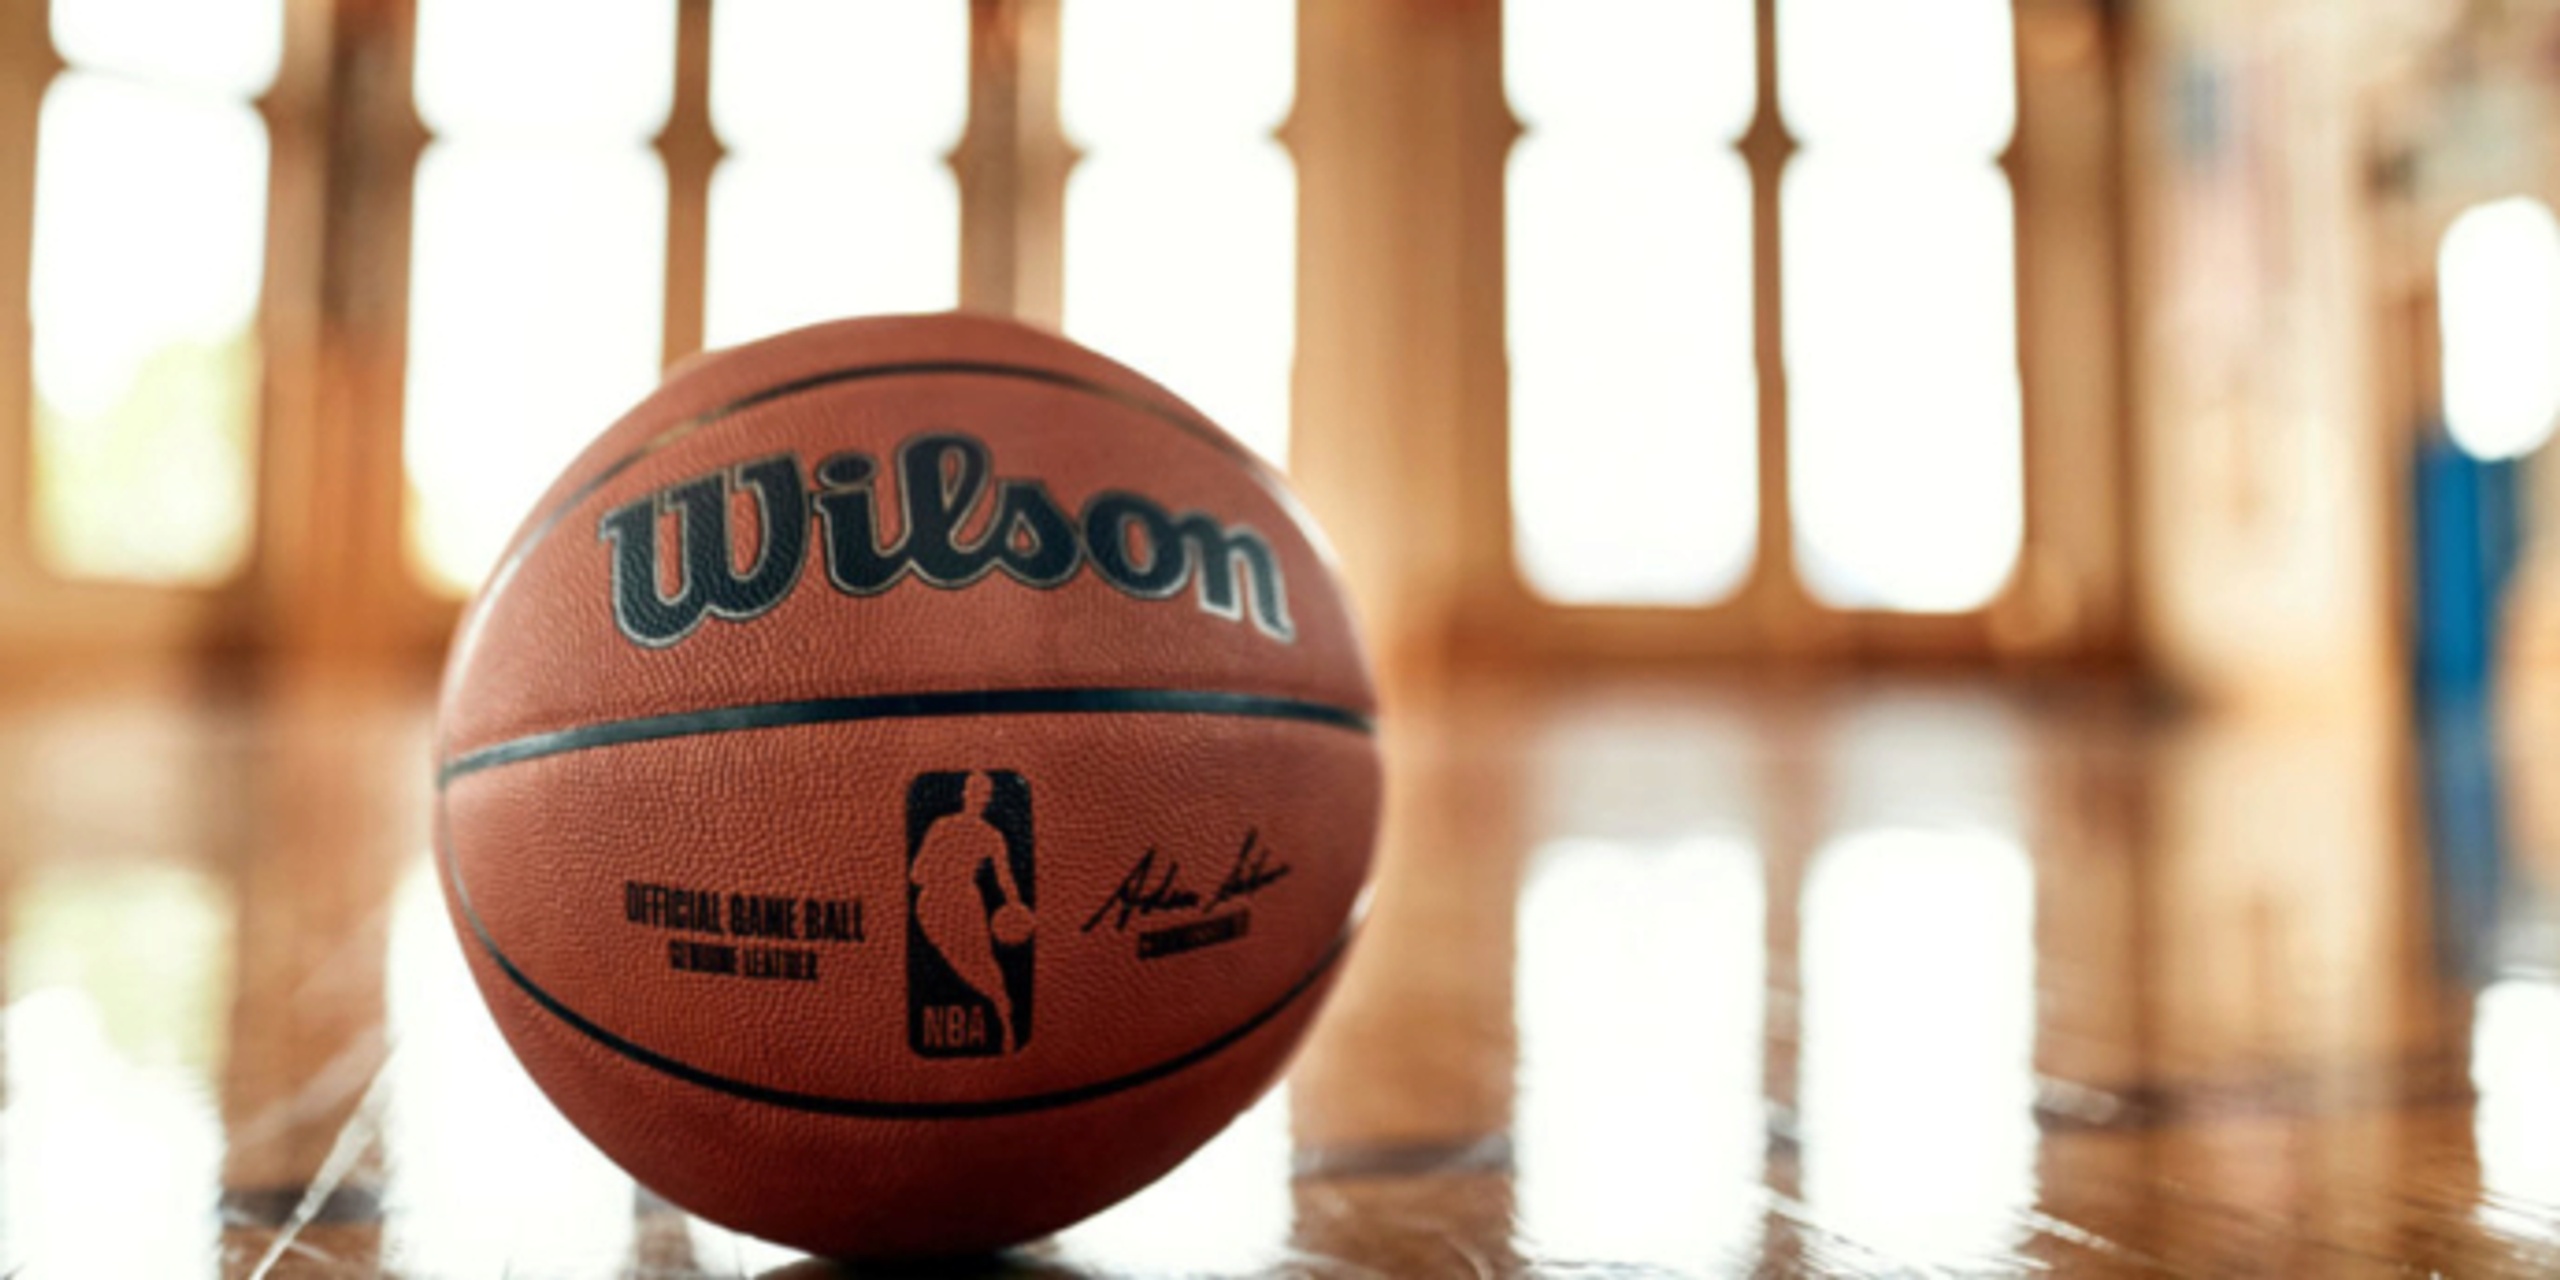 Wilson hoping NBA ball-switch doesn't turn into another fiasco